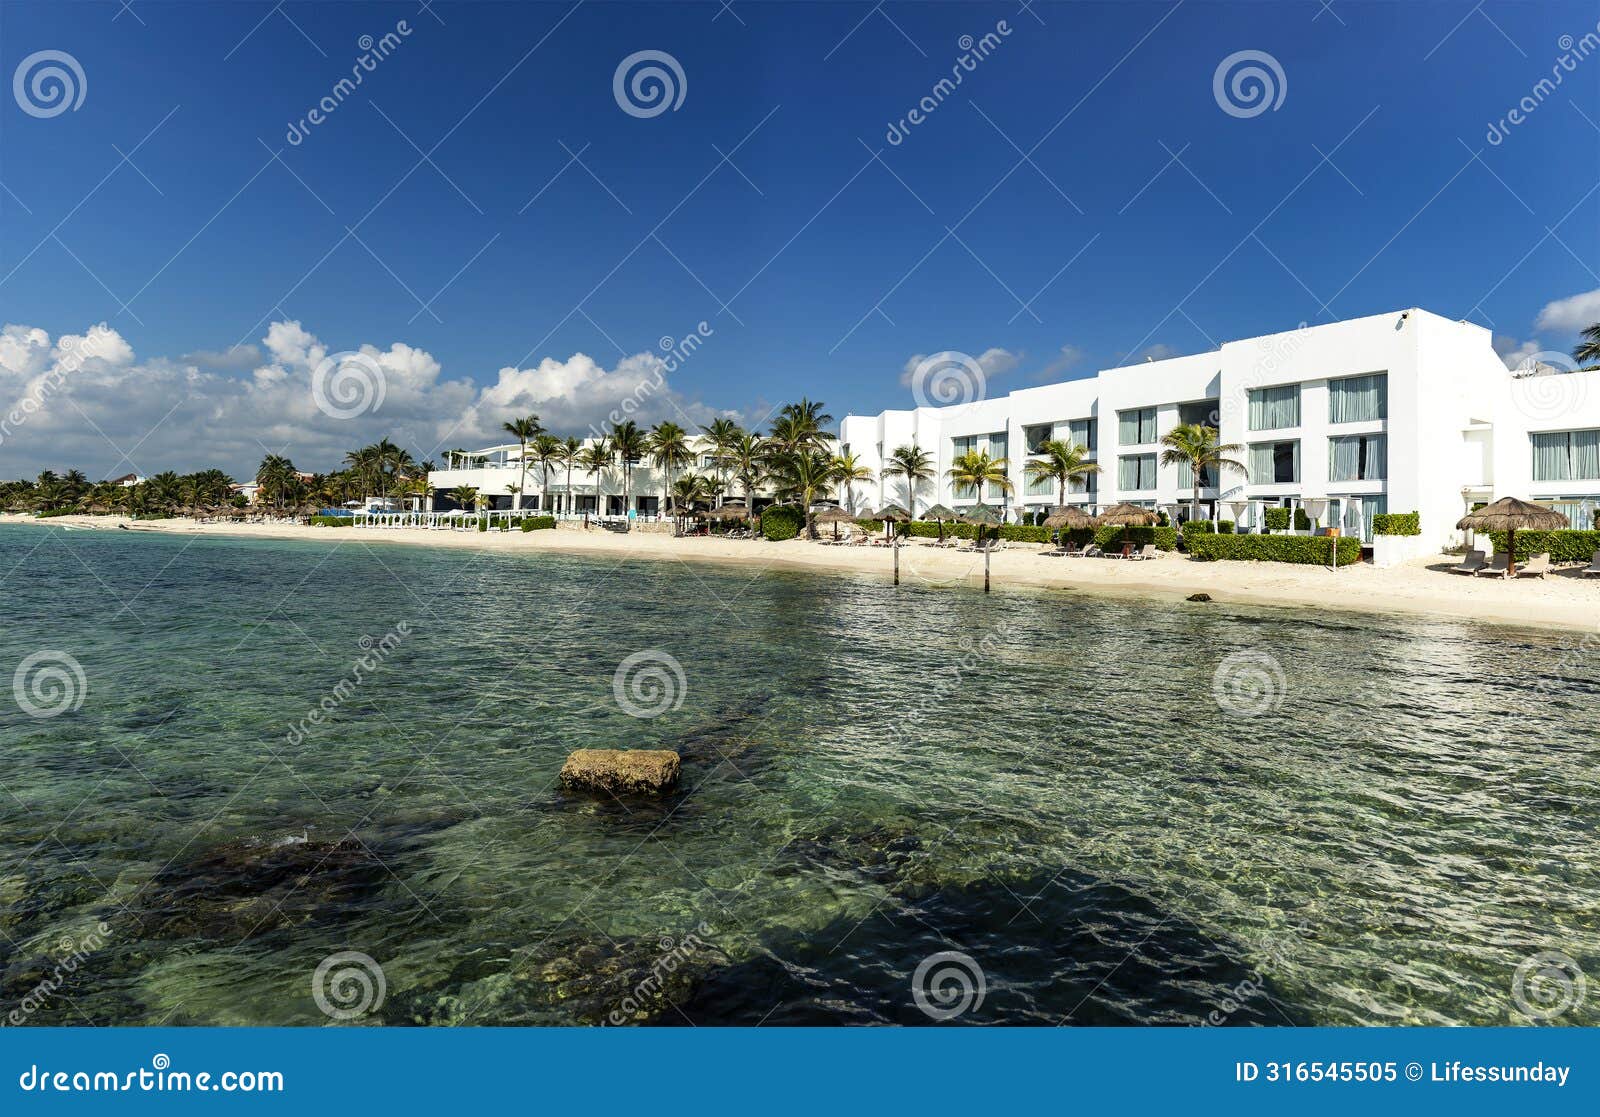 great caribbean resort hotel with paradisiacal beaches